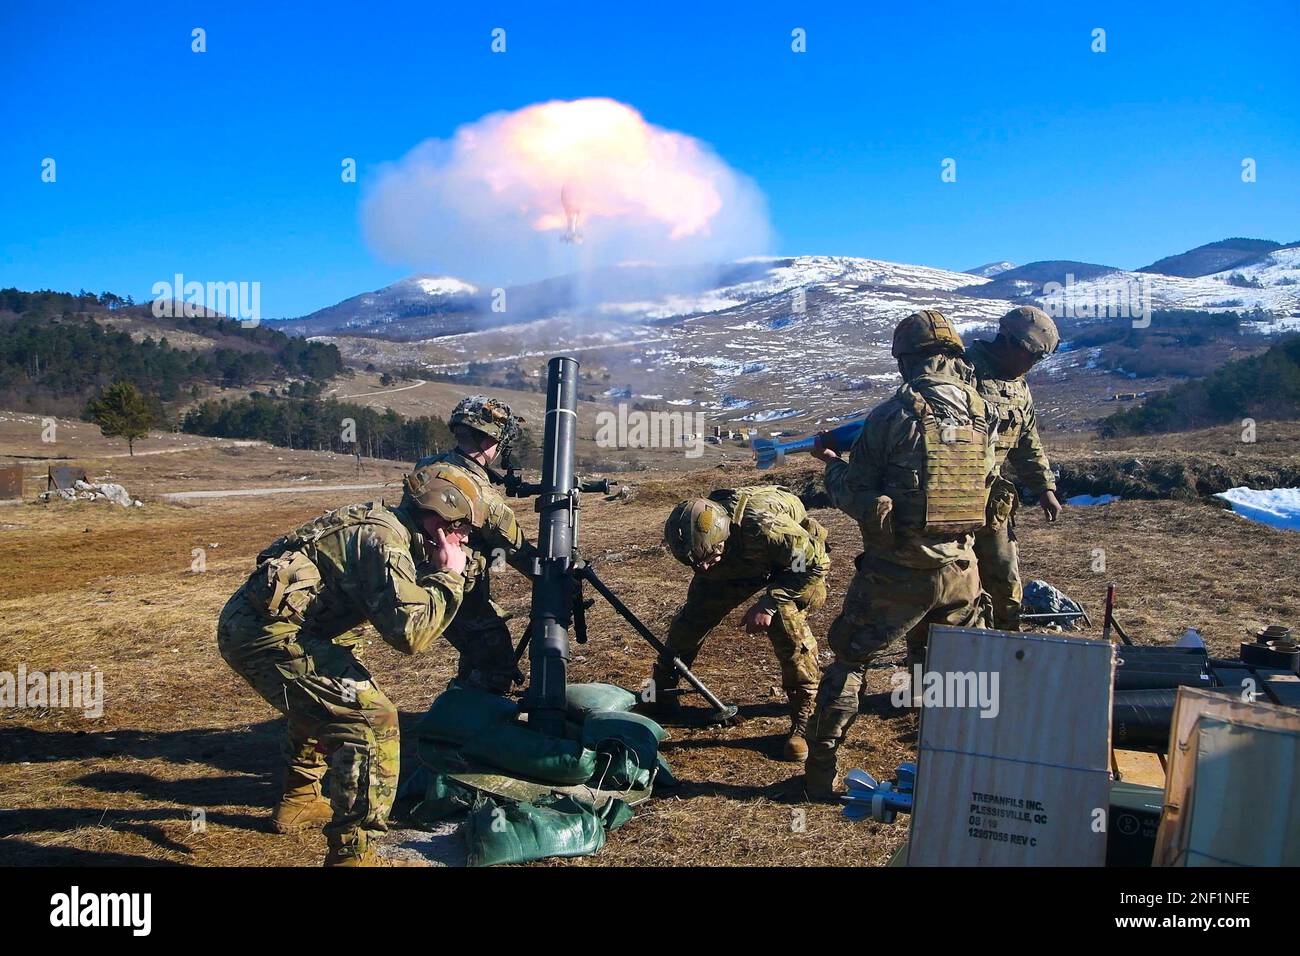 Postojna, Slovenia. 7th Feb, 2023. U.S. Army Paratroopers assigned to 2nd Battalion, 503rd Infantry Regiment, 173rd Airborne Brigade, fire an M120 120 mm mortar system during Exercise Thunder Mortar Gunnery at Pocek Range in Slovenia, February. 7, 2023. The 173rd Airborne Brigade is the U.S. Army Contingency Response Force in Europe, capable of projecting ready forces anywhere in the U.S. European, Africa or Central Commands' areas of responsibility. Credit: U.S. Army/ZUMA Press Wire Service/ZUMAPRESS.com/Alamy Live News Stock Photo